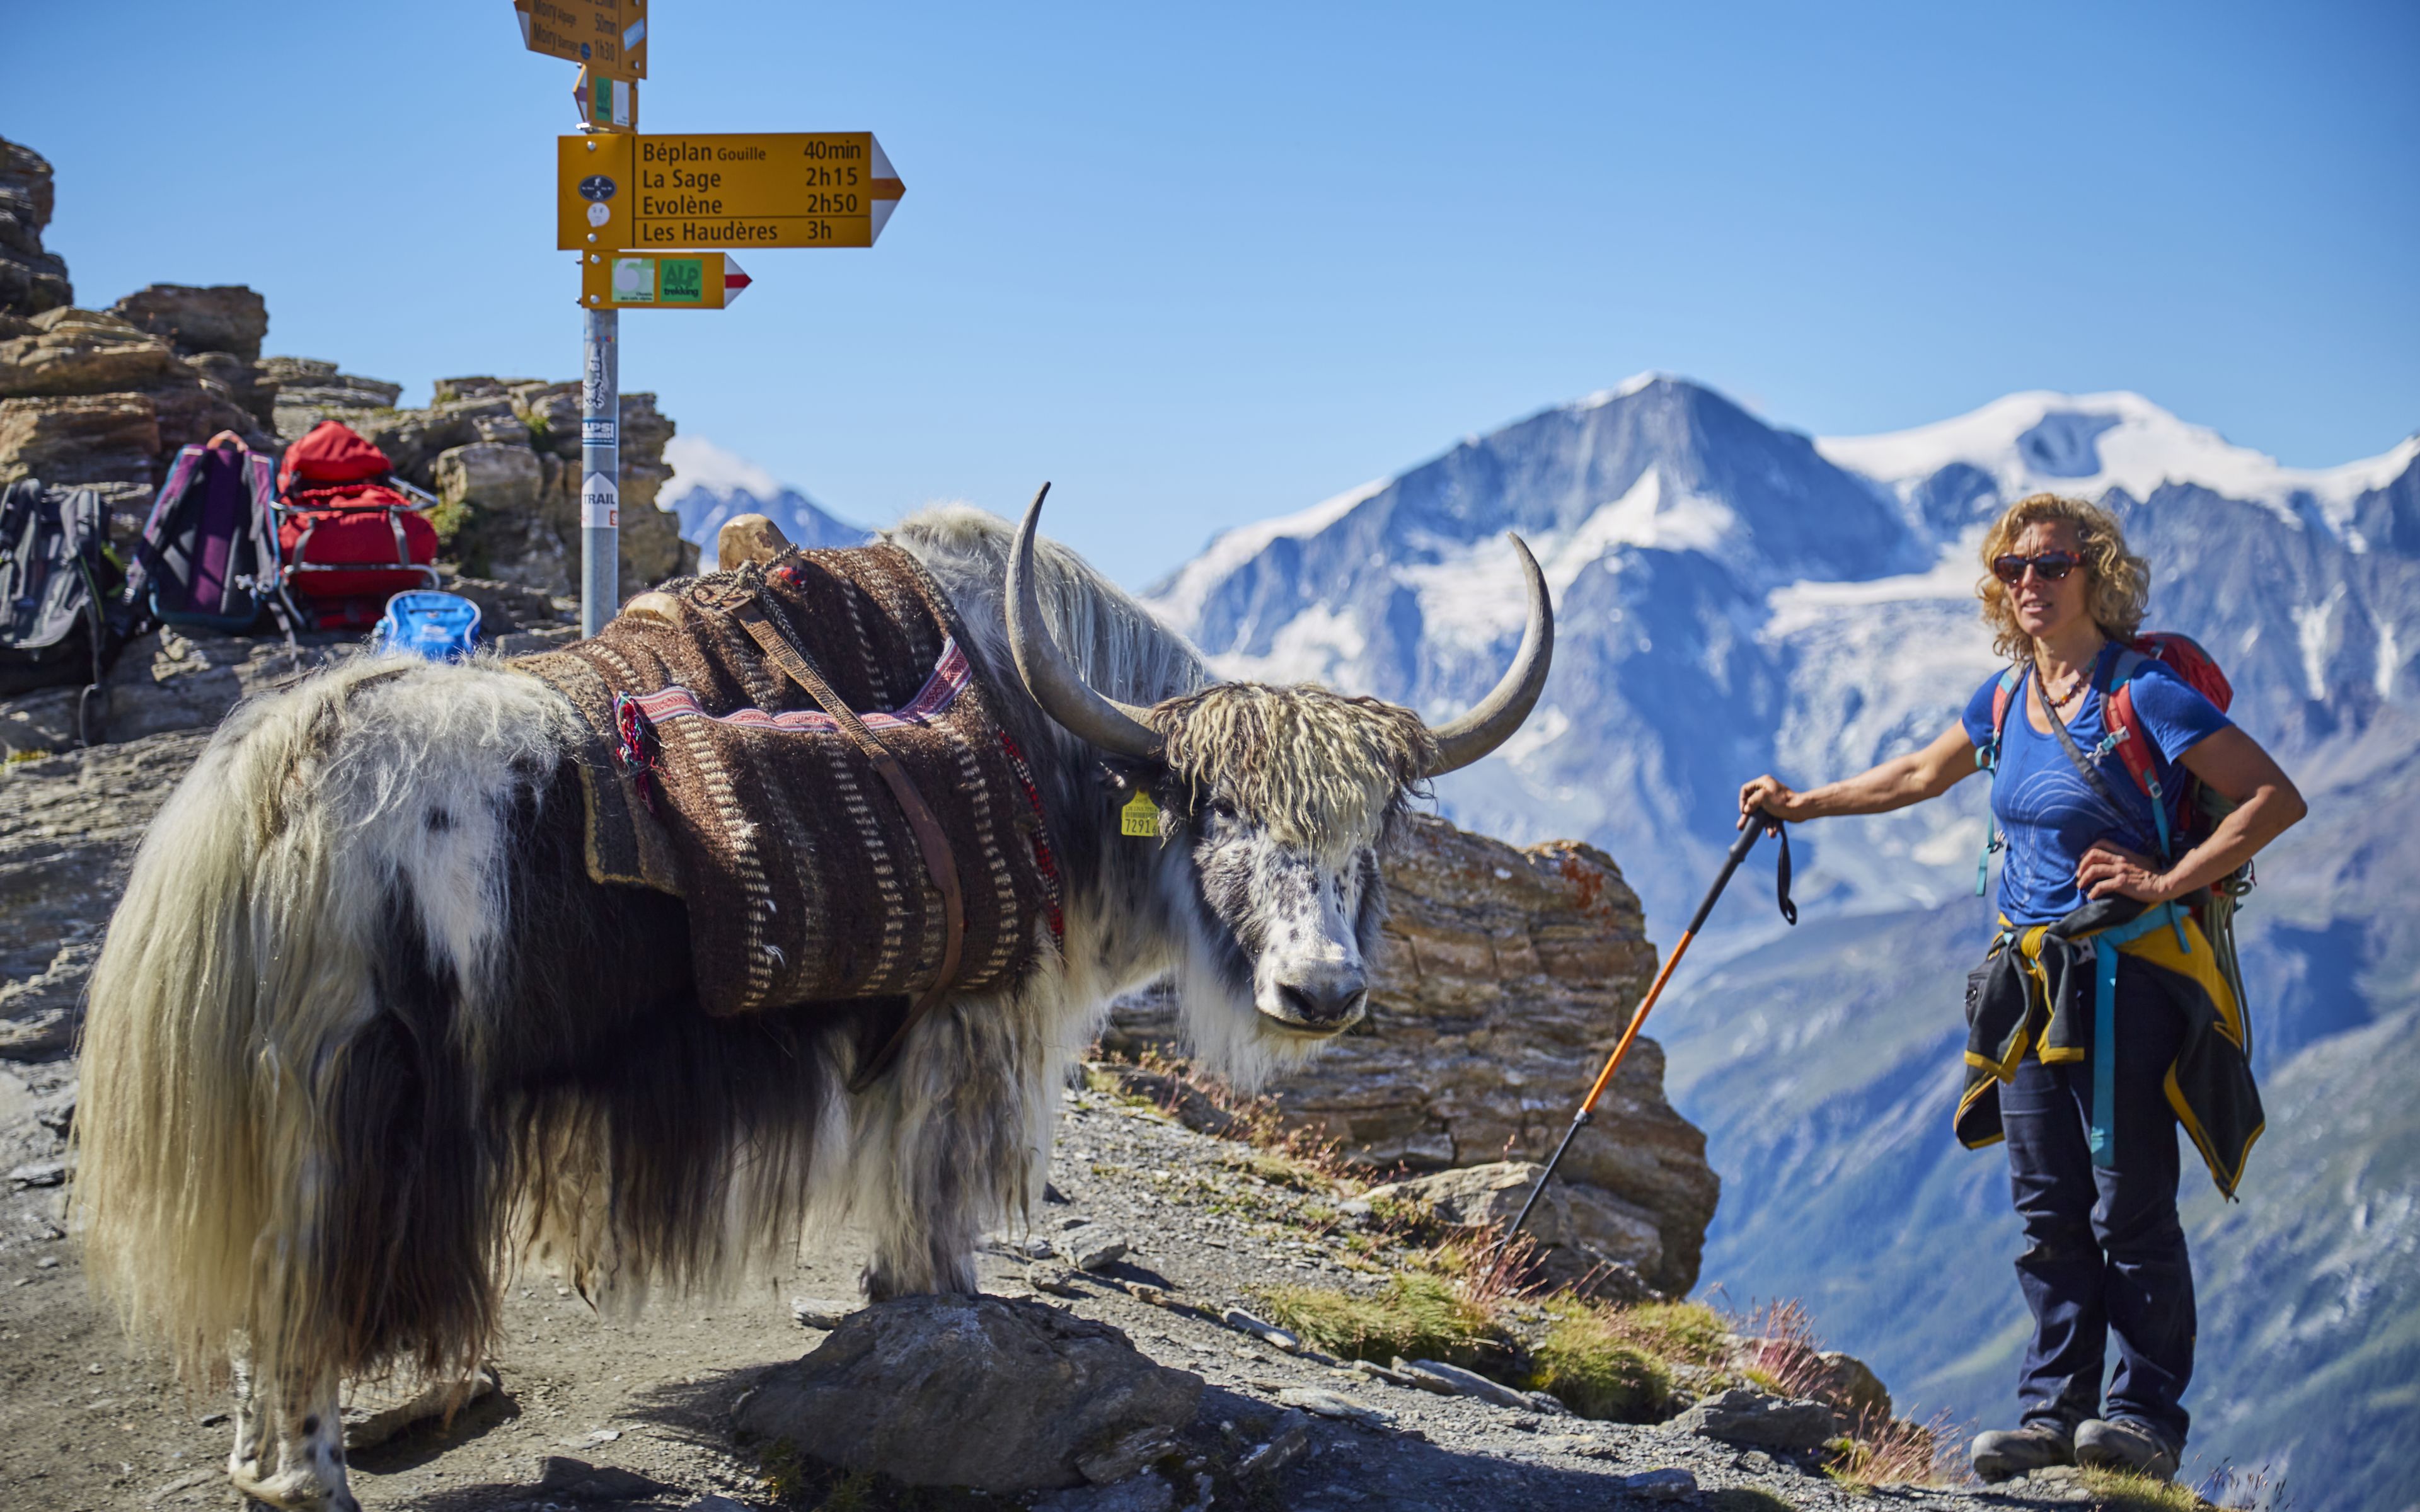 Rosula Blanc and her yaks know the Val d’Hérens inside out.